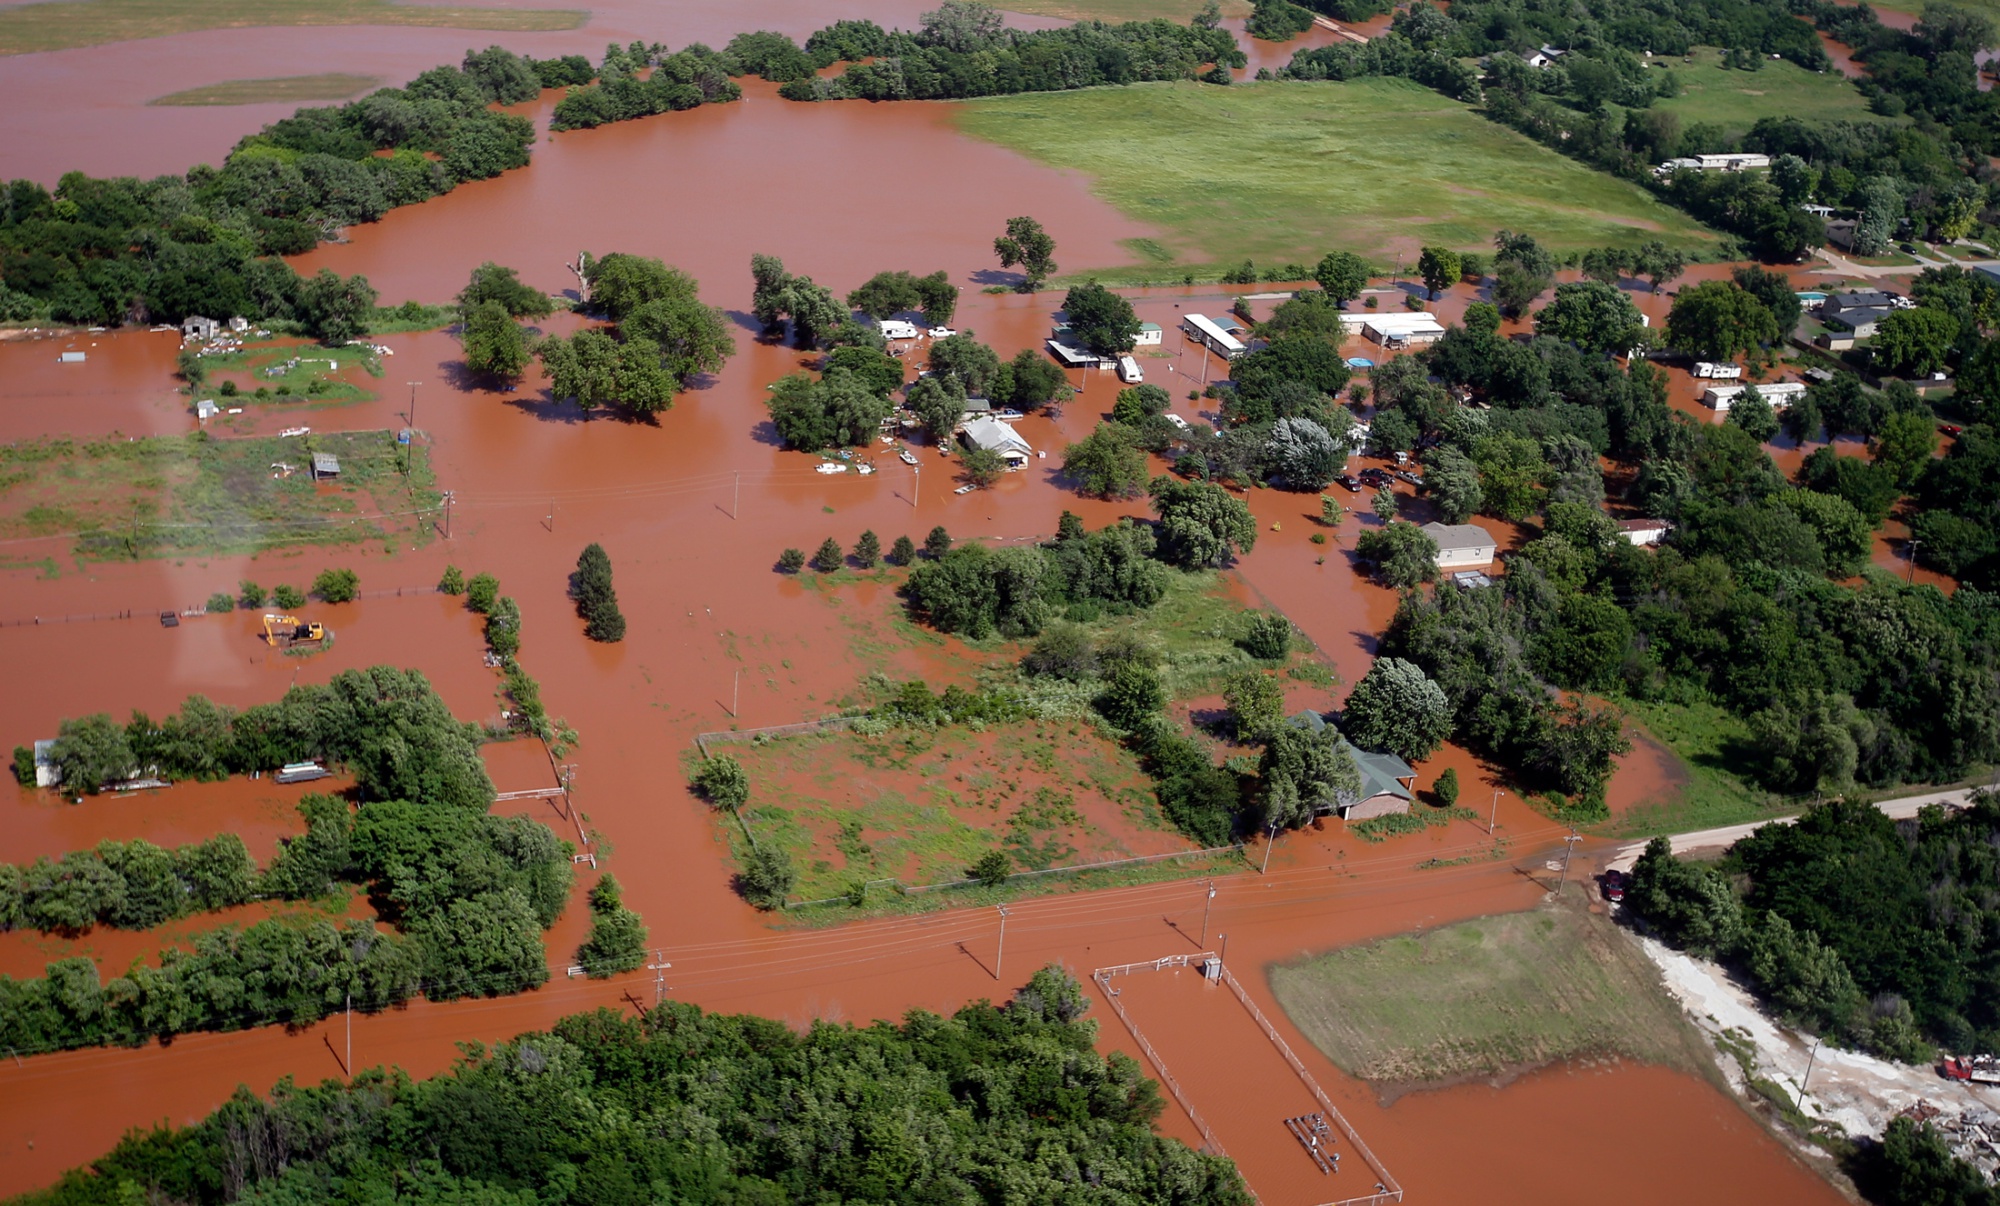 Aerial view of flooding in Kingfisher, Oklahoma on 21 May 2019. Photo: Bloomberg